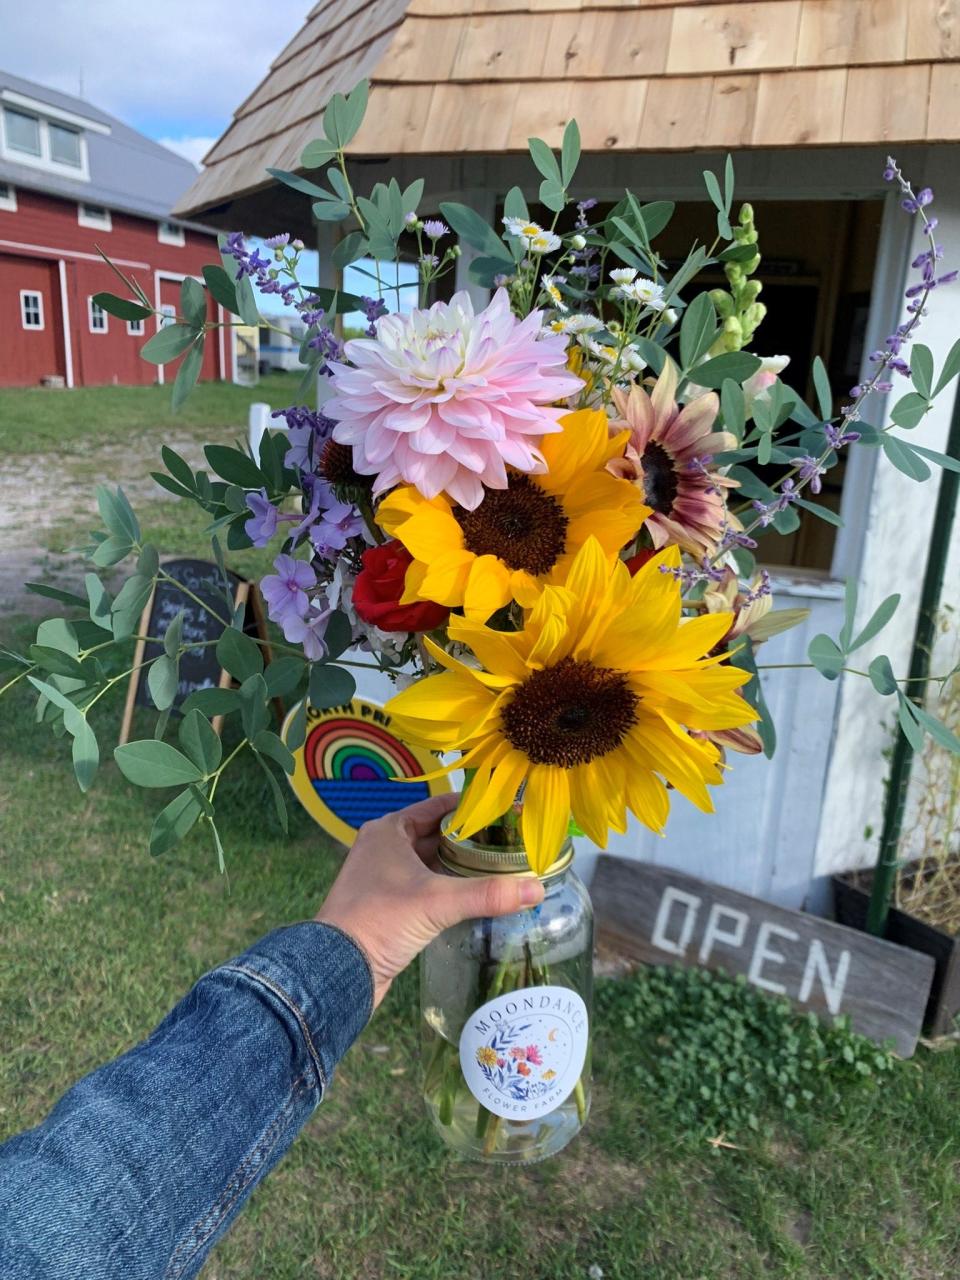 Moondance Flower Farm in Old Mission Peninsula offers visitors a chance to pick their own blooms.